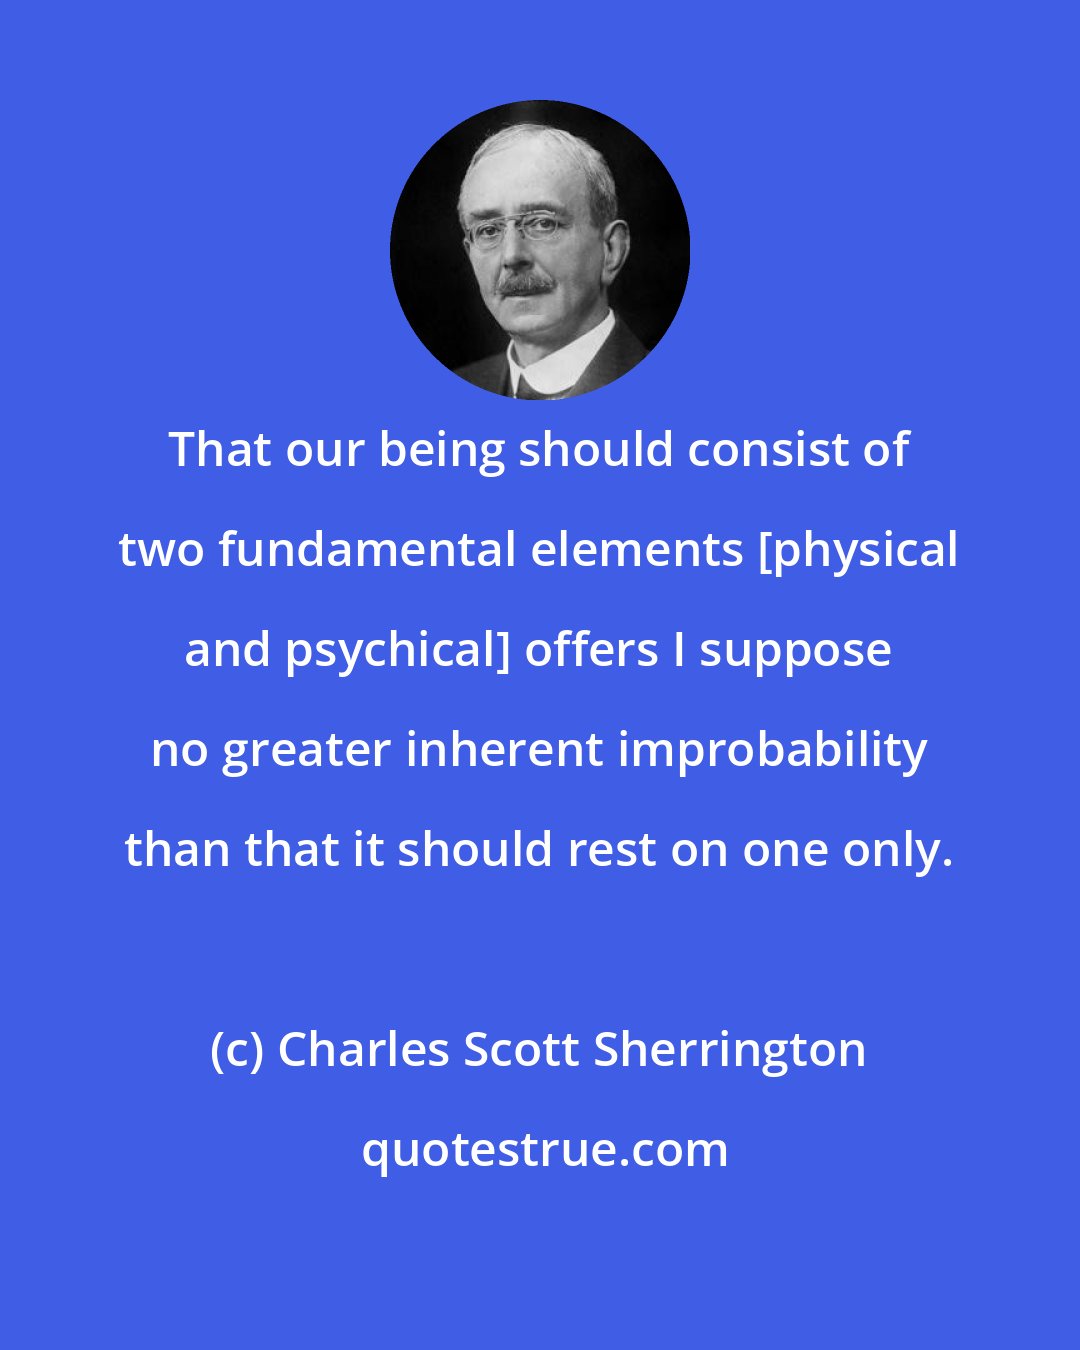 Charles Scott Sherrington: That our being should consist of two fundamental elements [physical and psychical] offers I suppose no greater inherent improbability than that it should rest on one only.